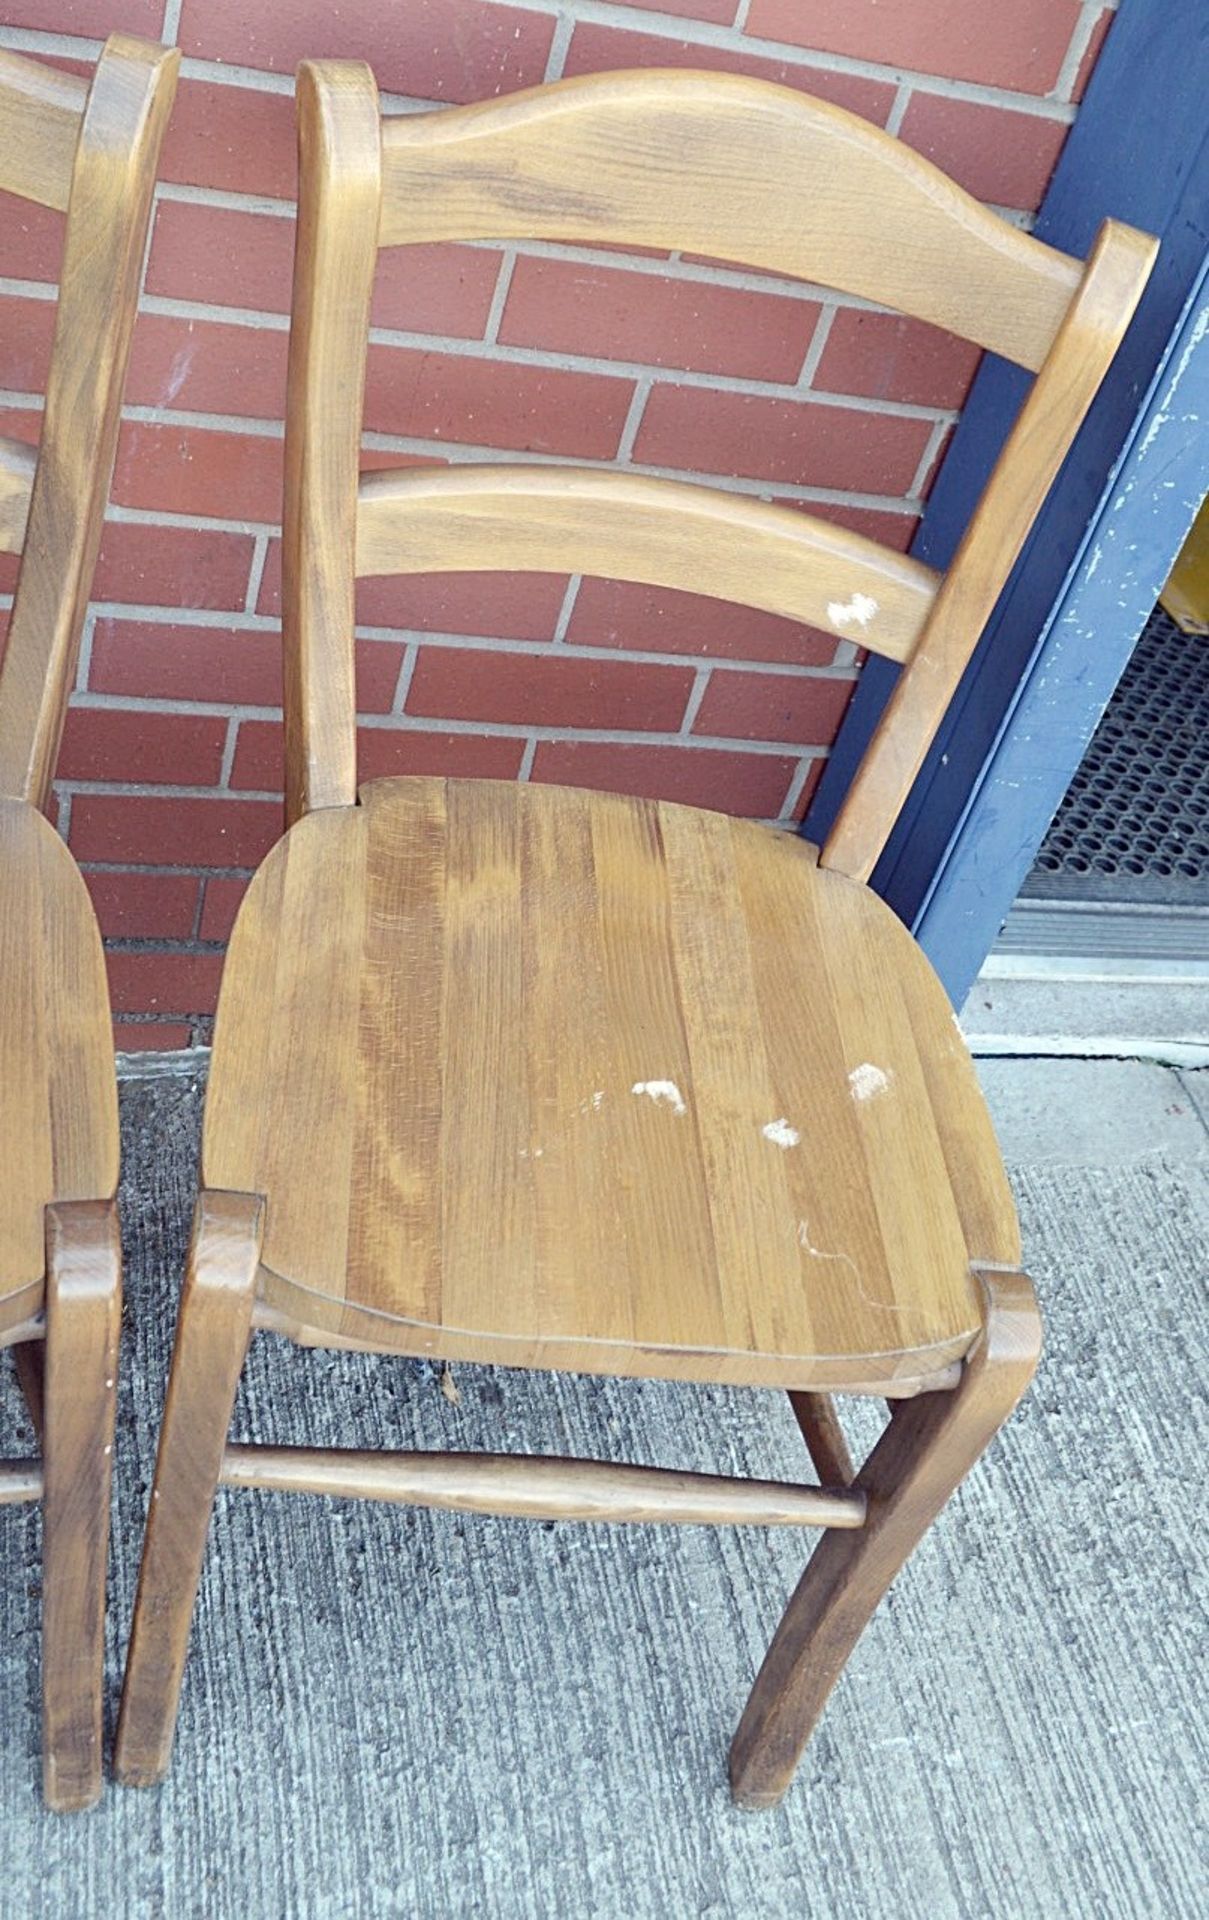 3 x Matching Sturdy Solid Wood Chairs With An Attractive Varnished Finish - Dimensions: H90 x W47 - Image 4 of 7